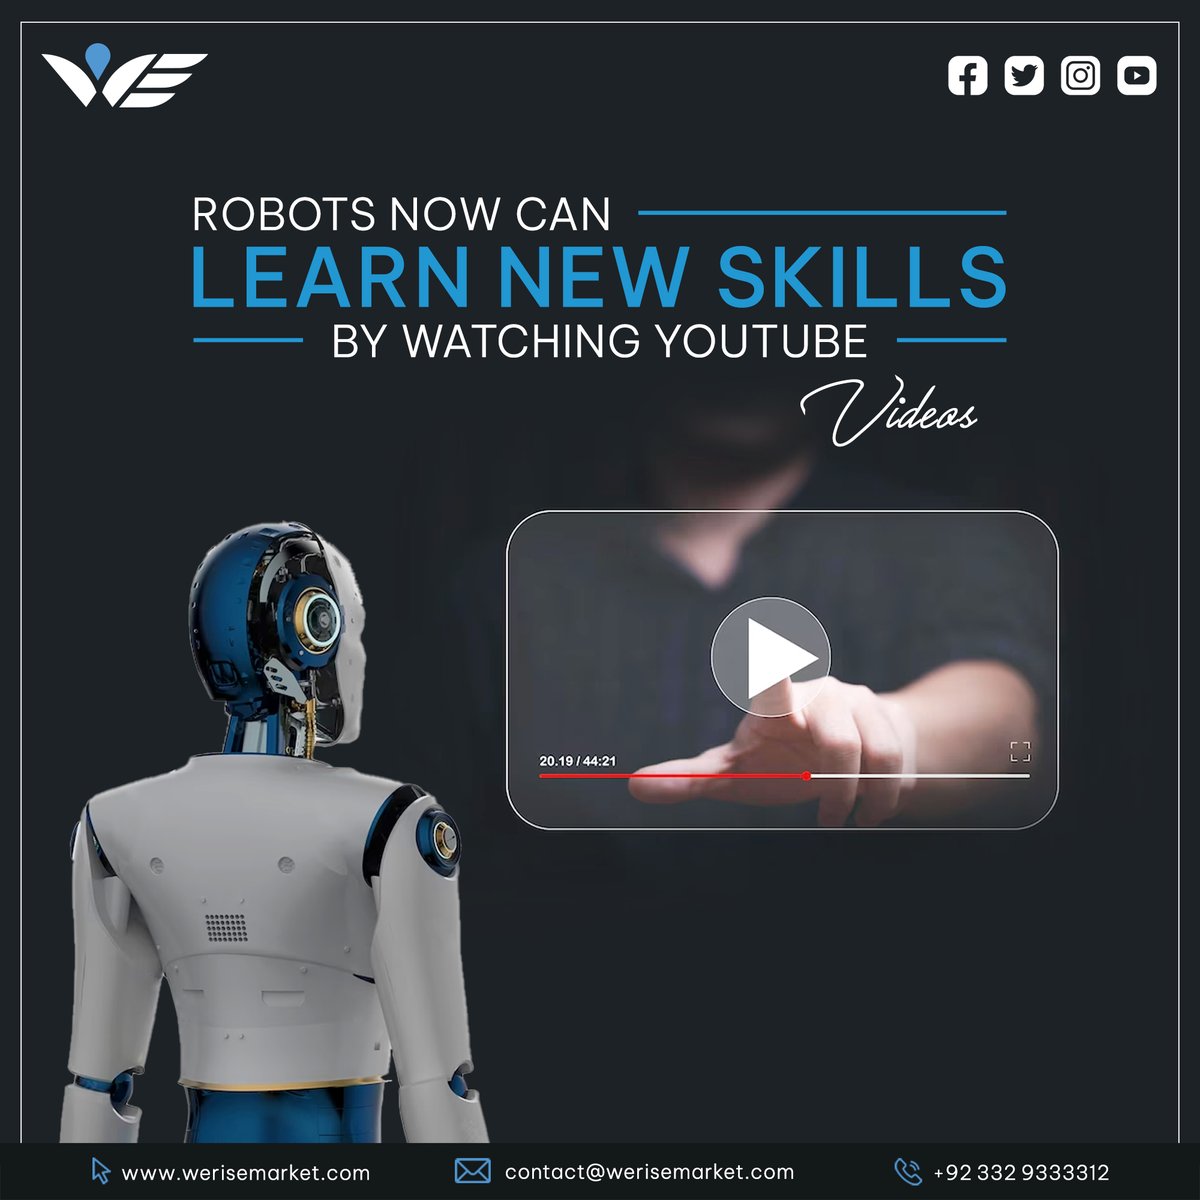 Robots are no longer just programmed - they can now learn new skills by watching YouTube videos! #WeRiseMarket is at the forefront of this exciting technology revolution. Check out our website to find out more and join us on the journey to a smarter future.